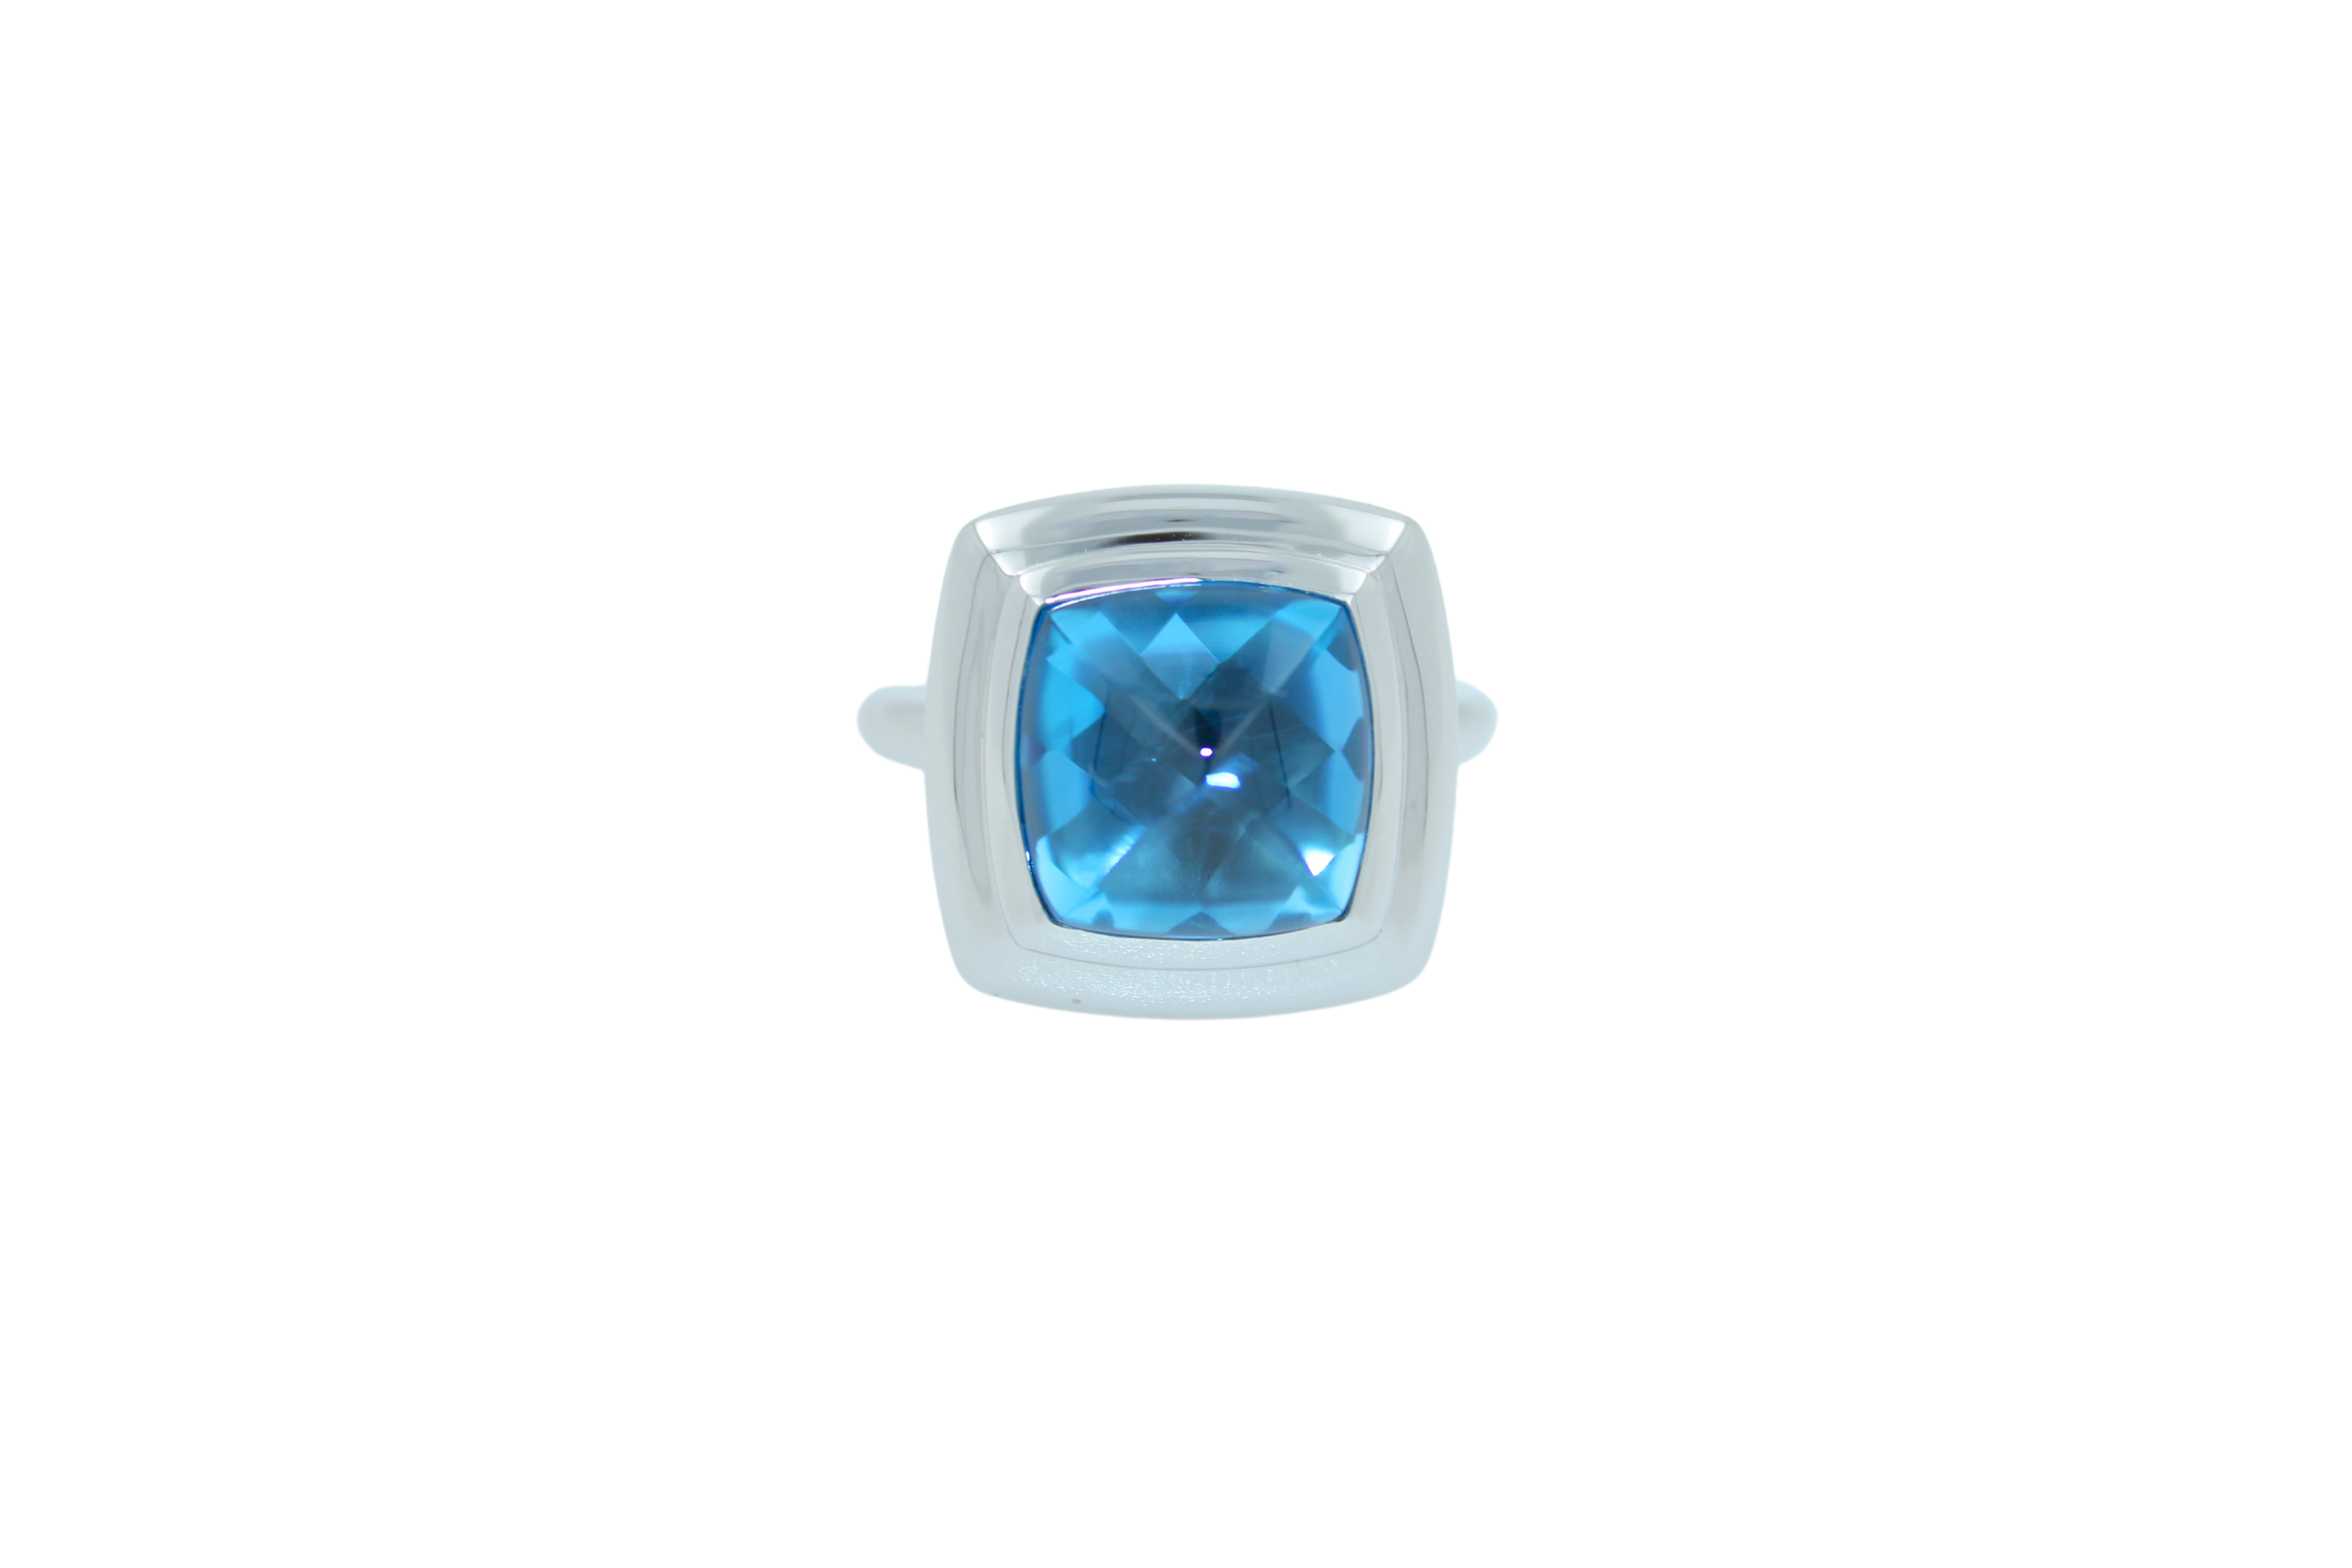 Blue Topaz Sugarloaf Cabochon Mountain Pyramid Cone Cocktail 18K White Gold Ring
18K White Gold
11.00 cts Blue Topaz
Beautiful, Unique & Rare - Custom Cut Gemstone Shape
Medium Dark Hues and Shades of a High Quality Blue Topaz
Comfortable and solid